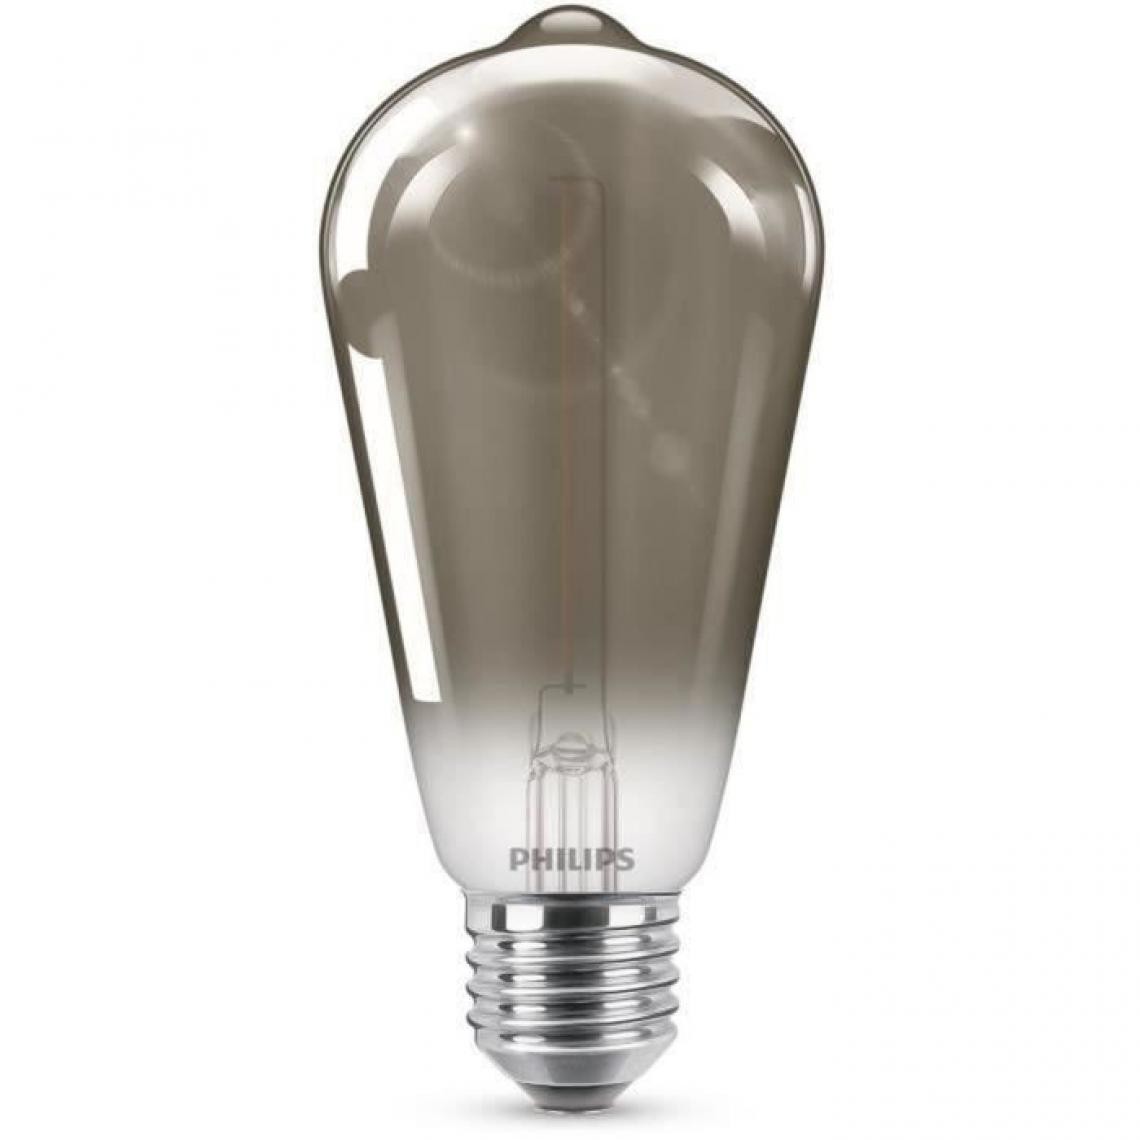 Philips - Ampoule LED PHILIPS Non dimmable - Verre smocky - E27 - 11W - Blanc Chaud - Ampoules LED